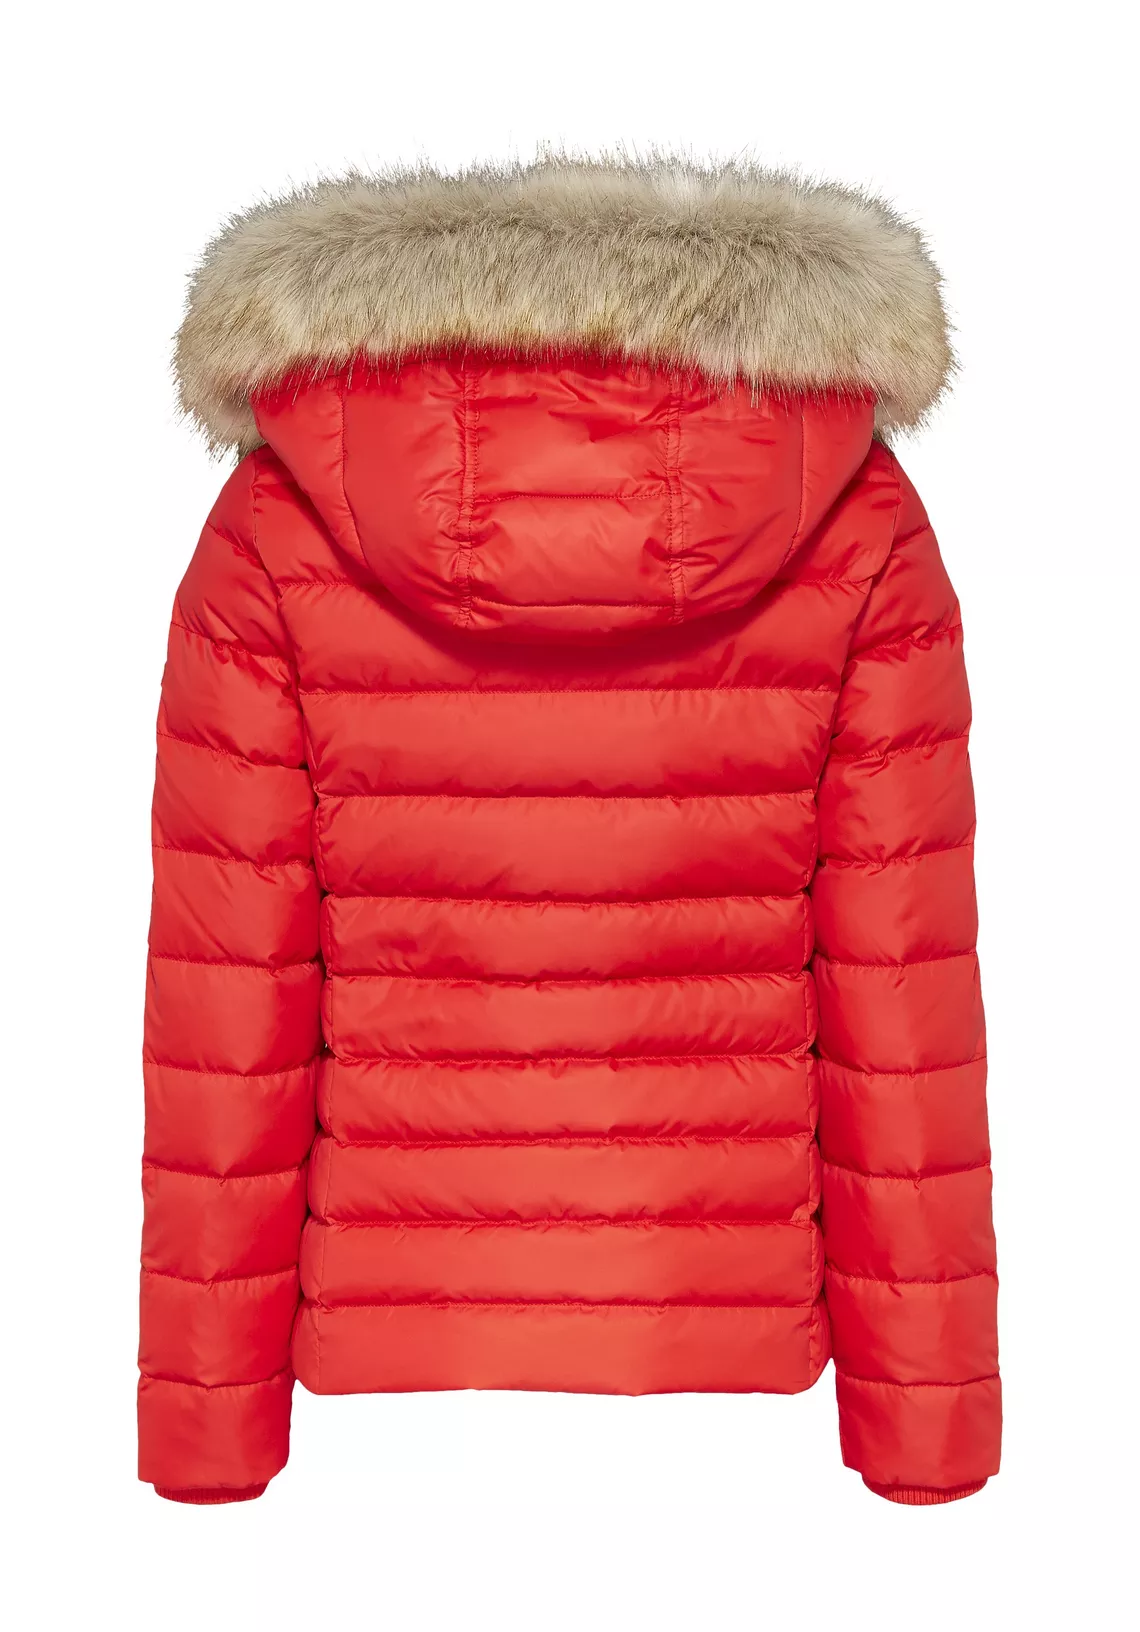 Tommy Hilfiger Basic Hooded Winter Coat Women, red